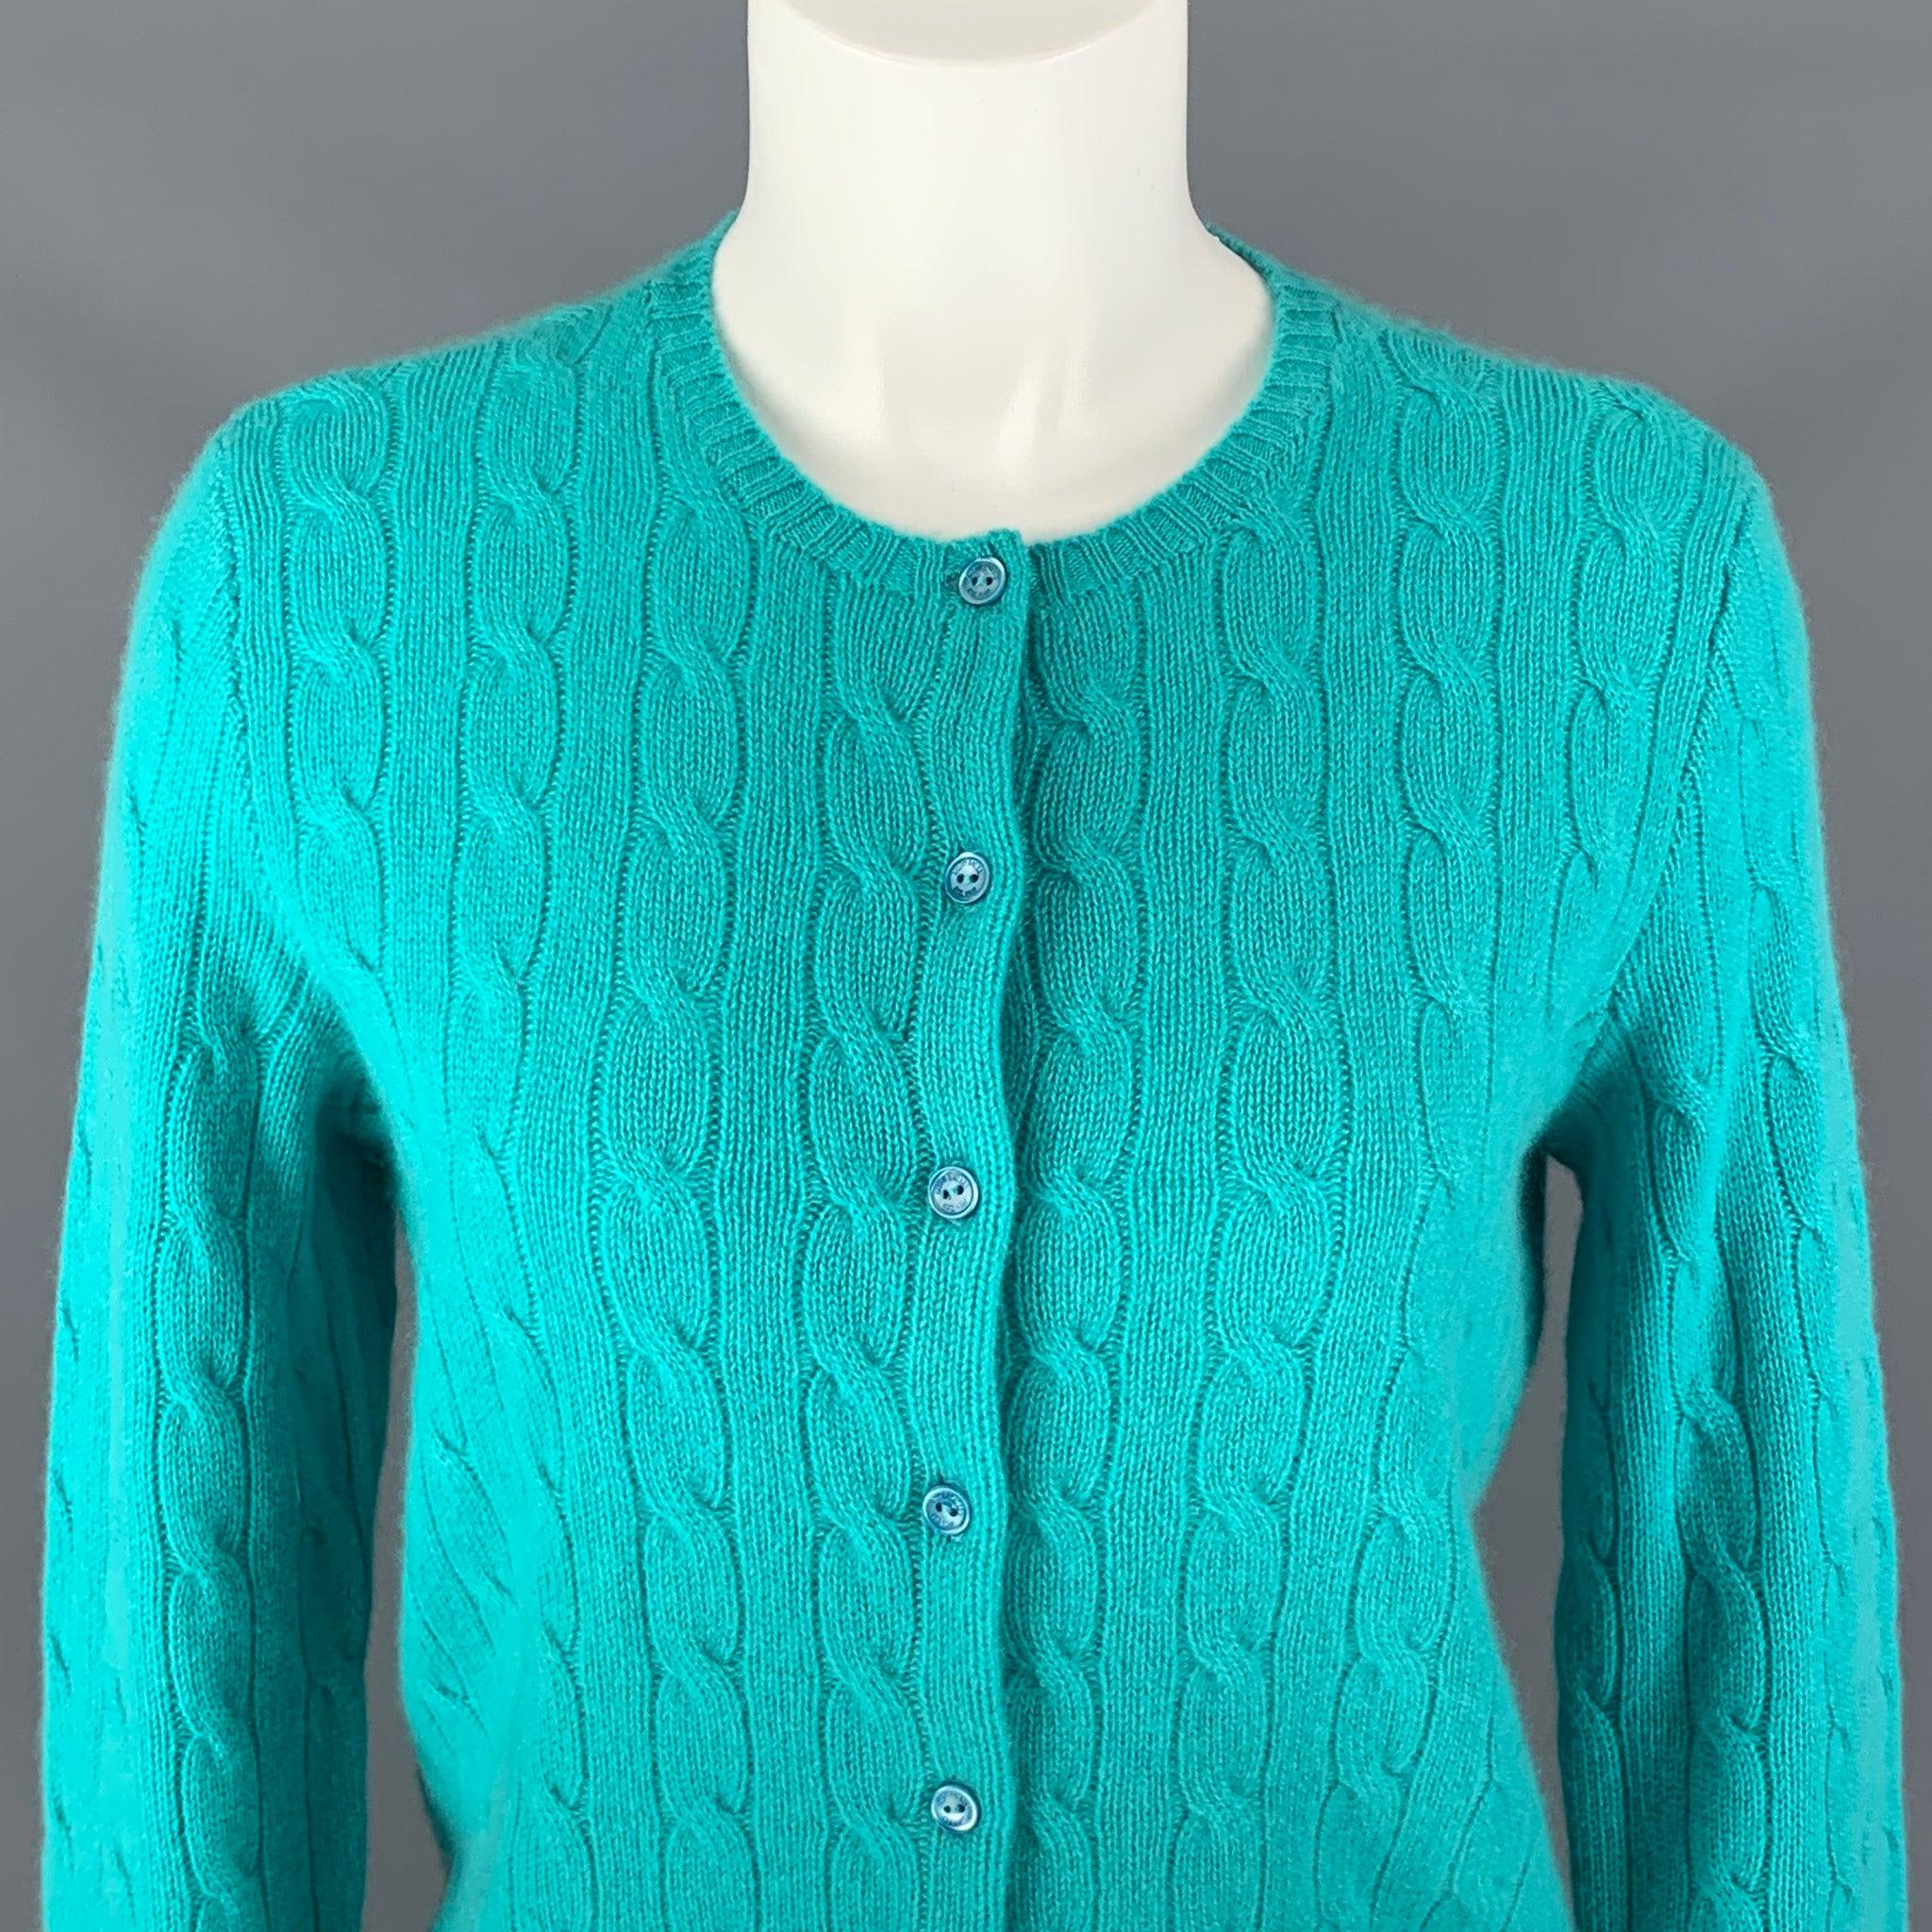 RALPH LAUREN BLACK LABEL cardigan sweater comes in a aqua cable knit cashmere featuring crew neck, button down and long sleeves. Excellent Pre-Owned Condition. 

Marked:   L 

Measurements: 
 
Shoulder: 15.5 inBust: 37 inSleeve: 28 inLength: 23 in
 